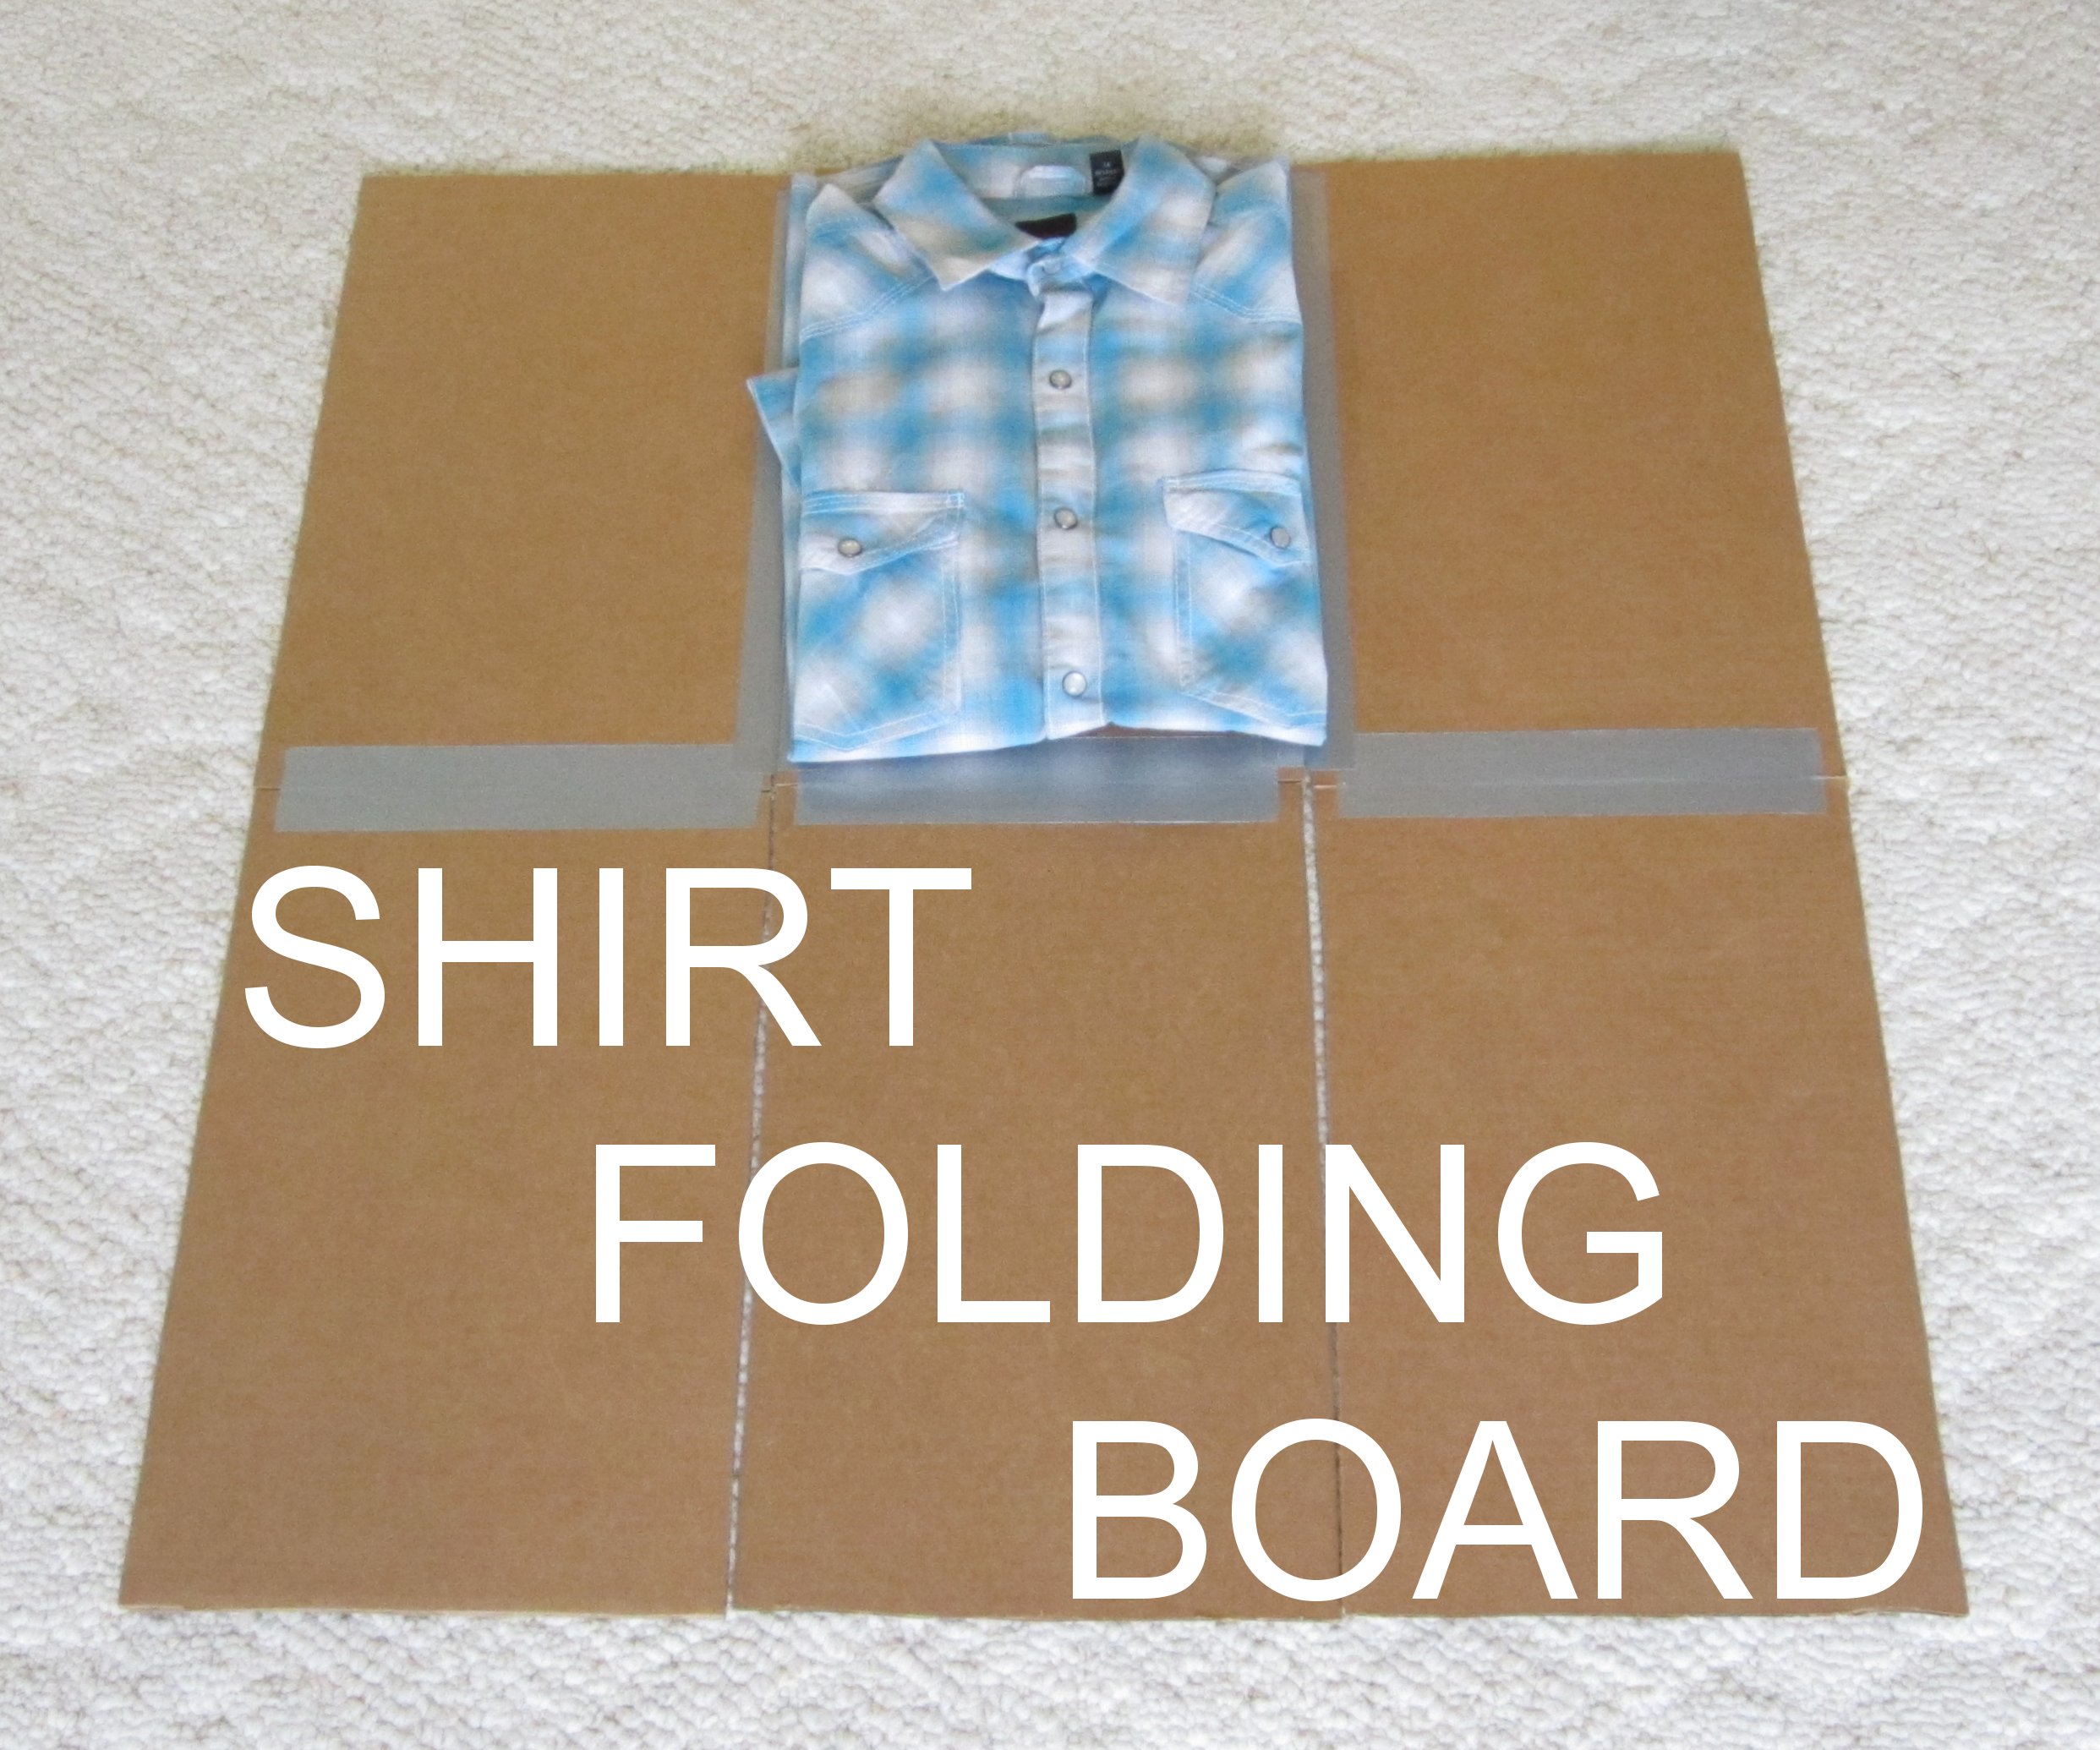 Shirt Folding Board from Cardboard and Duct Tape